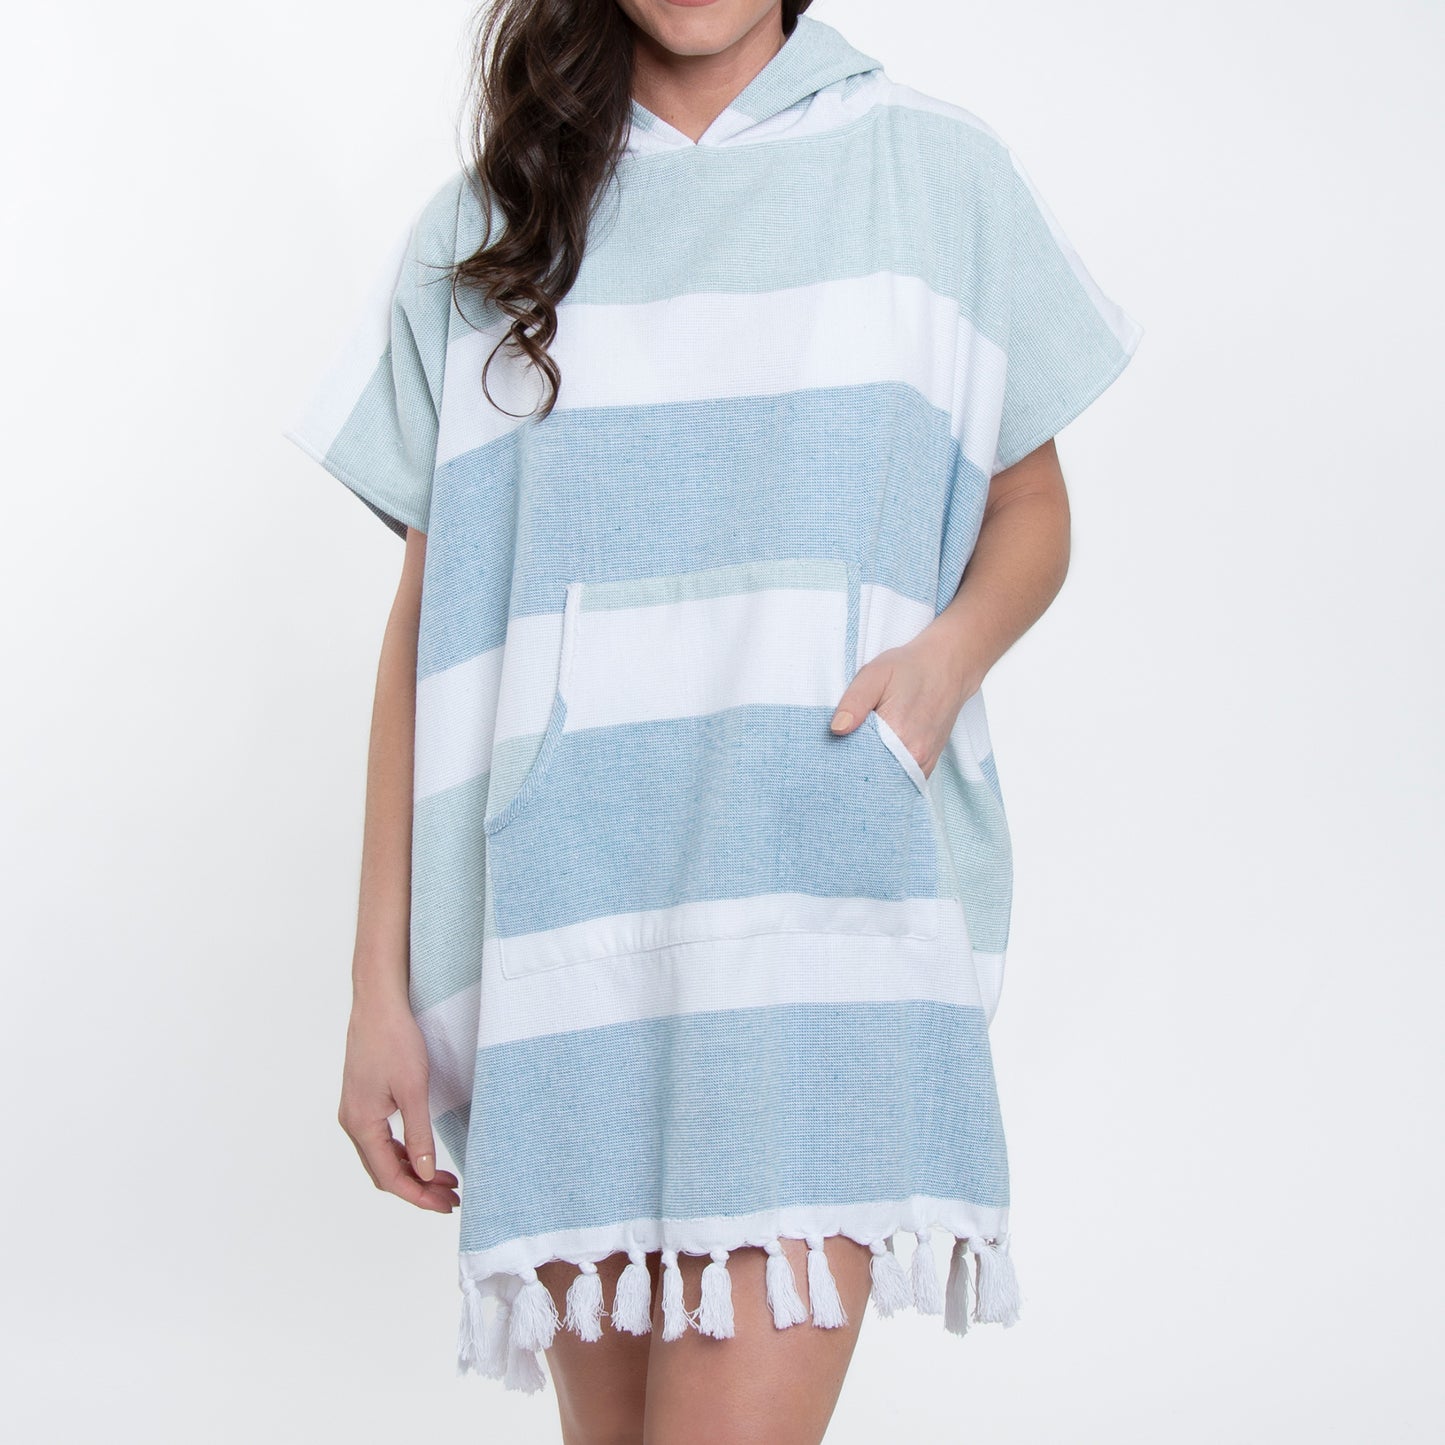 Freya Hooded Terry Cloth One Size Poncho Swimsuit Cover Up